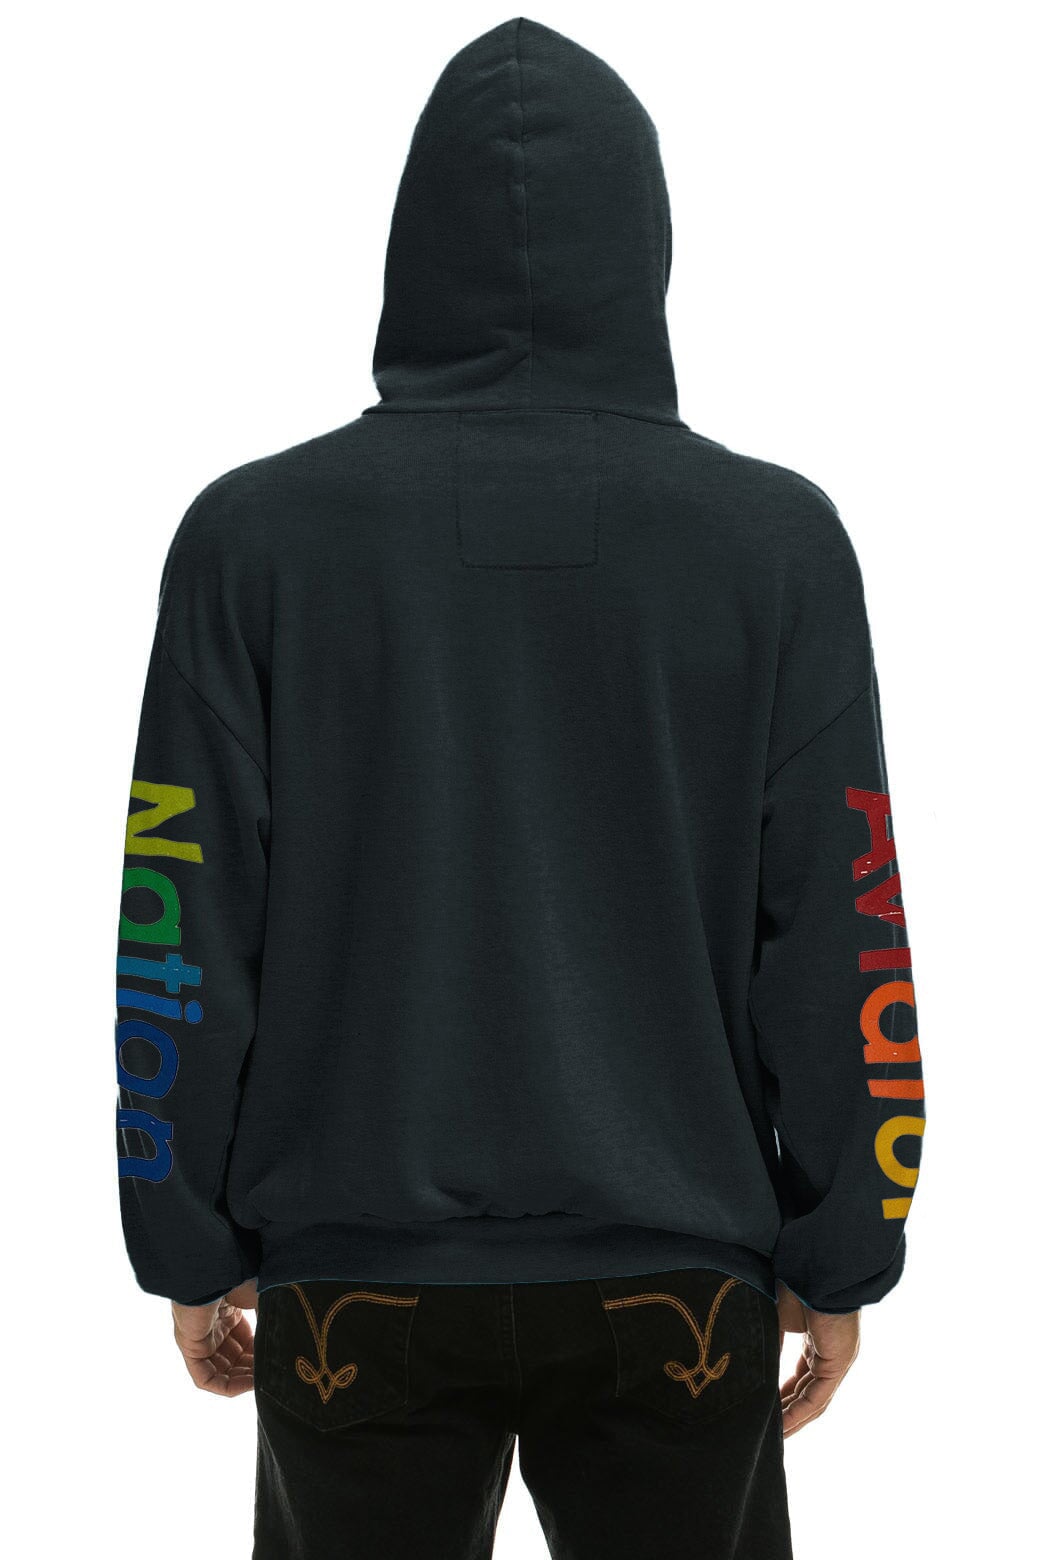 AVIATOR NATION NASHVILLE RELAXED PULLOVER HOODIE - CHARCOAL Hoodie Aviator Nation 